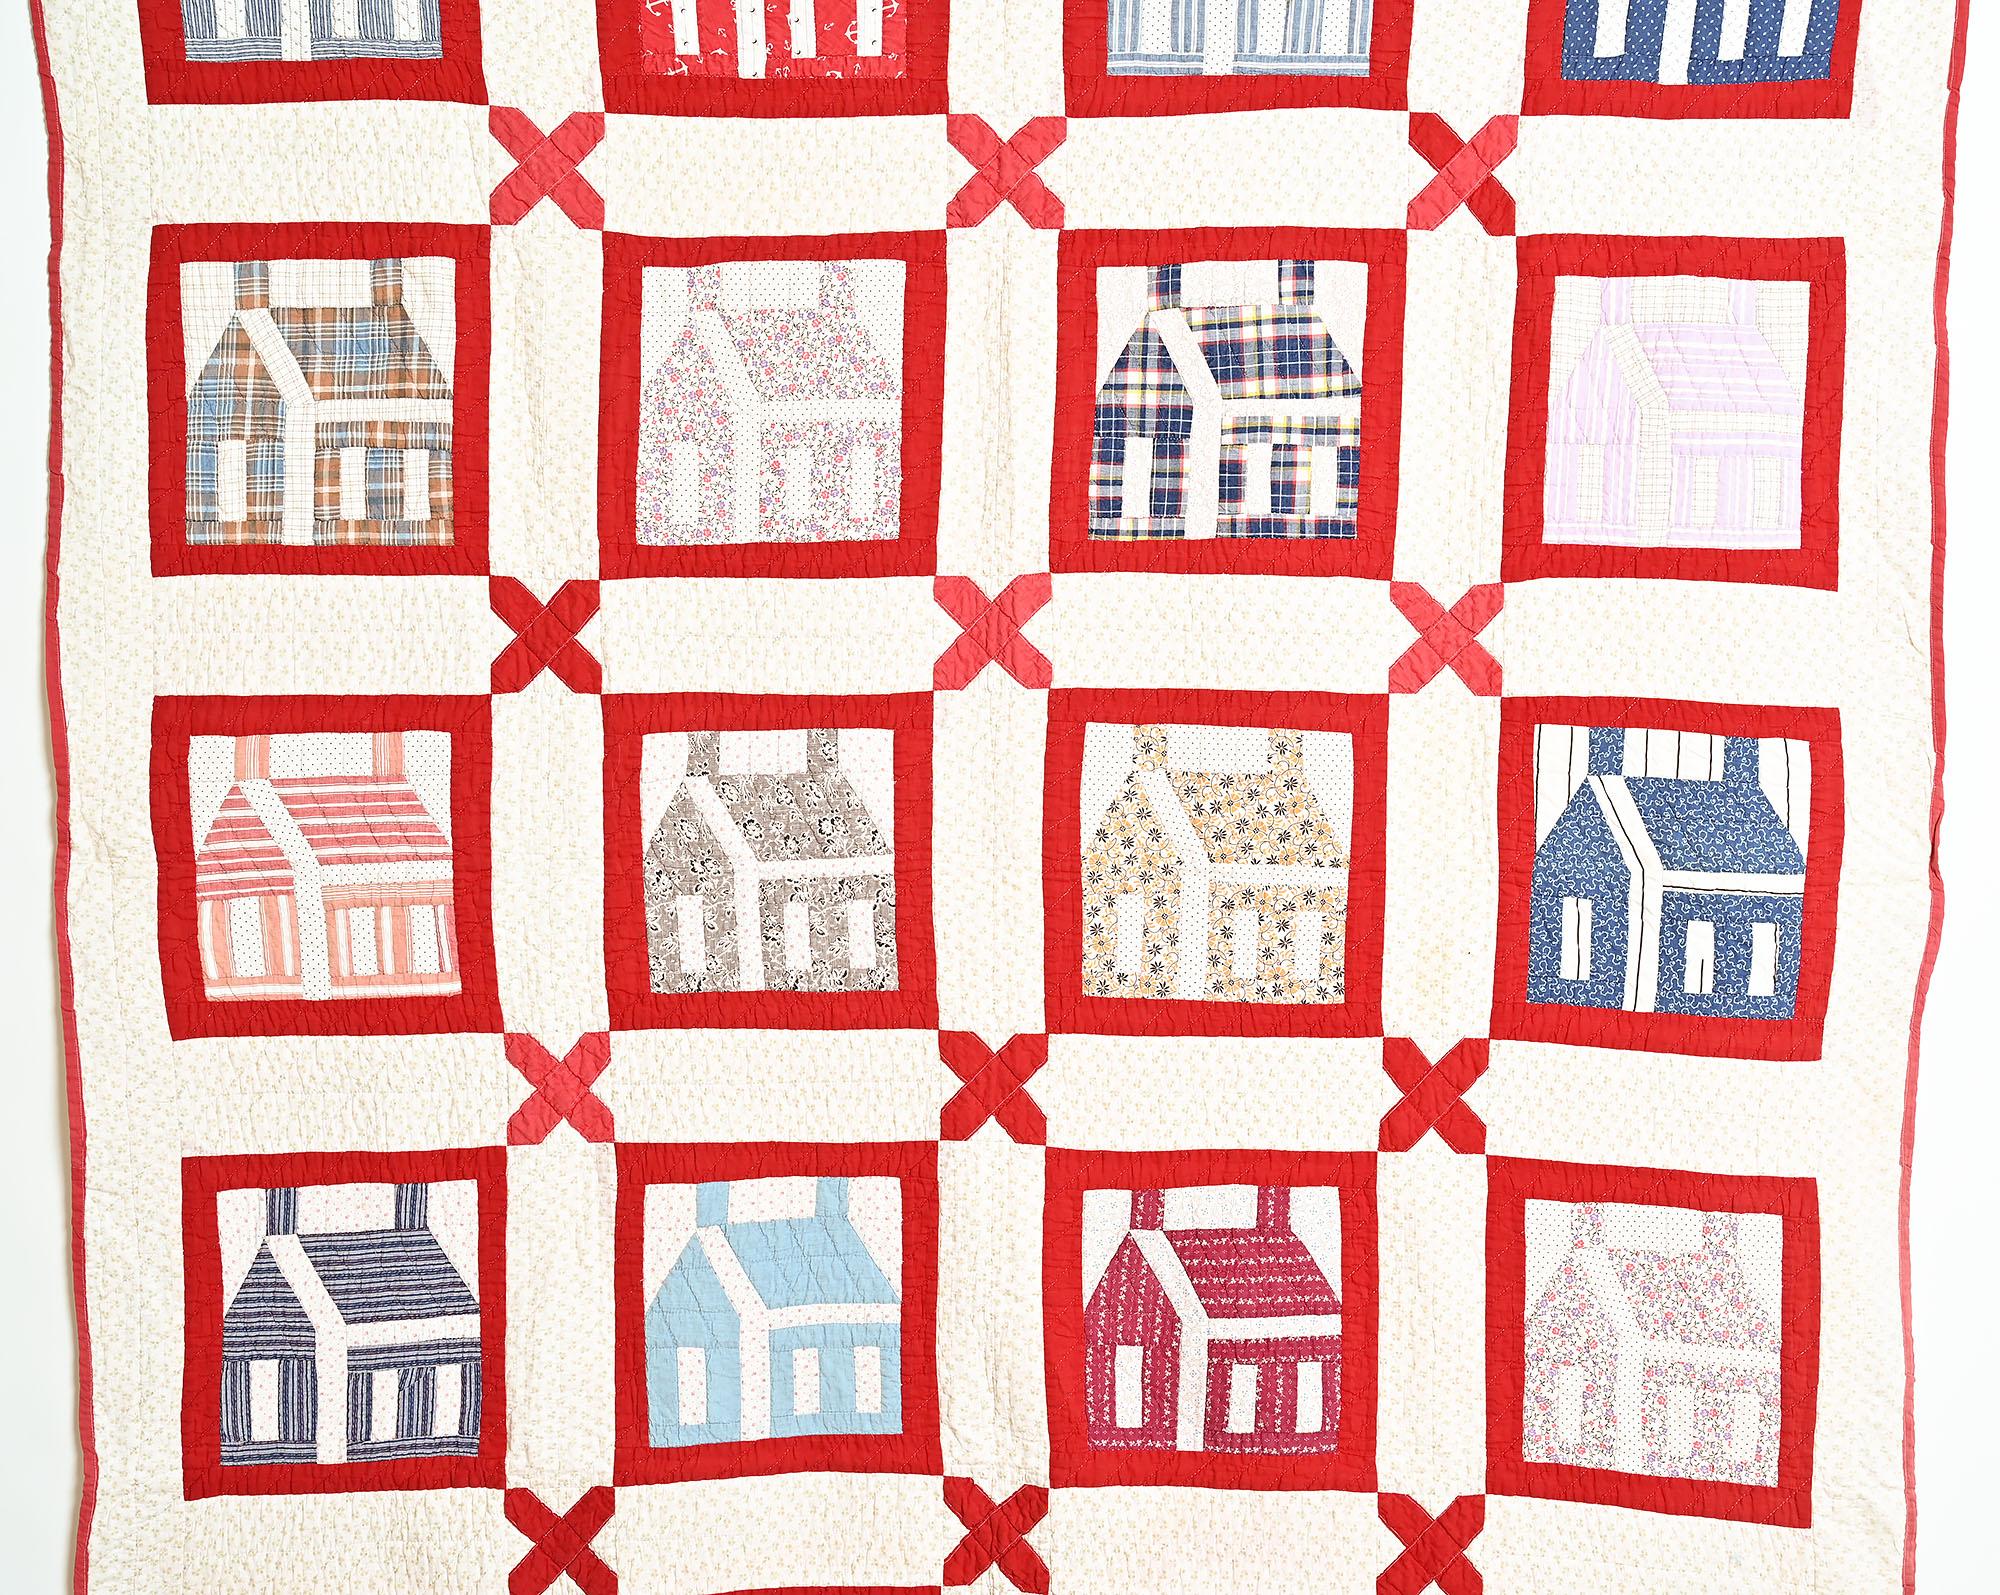 Schoolhouse is one of the most iconic of American quilt patterns. This lovely example has each Schoolhouse set in a vivid red frame with x's at the intersections between the blocks. Each building is a different fabric, most of which are prints. The